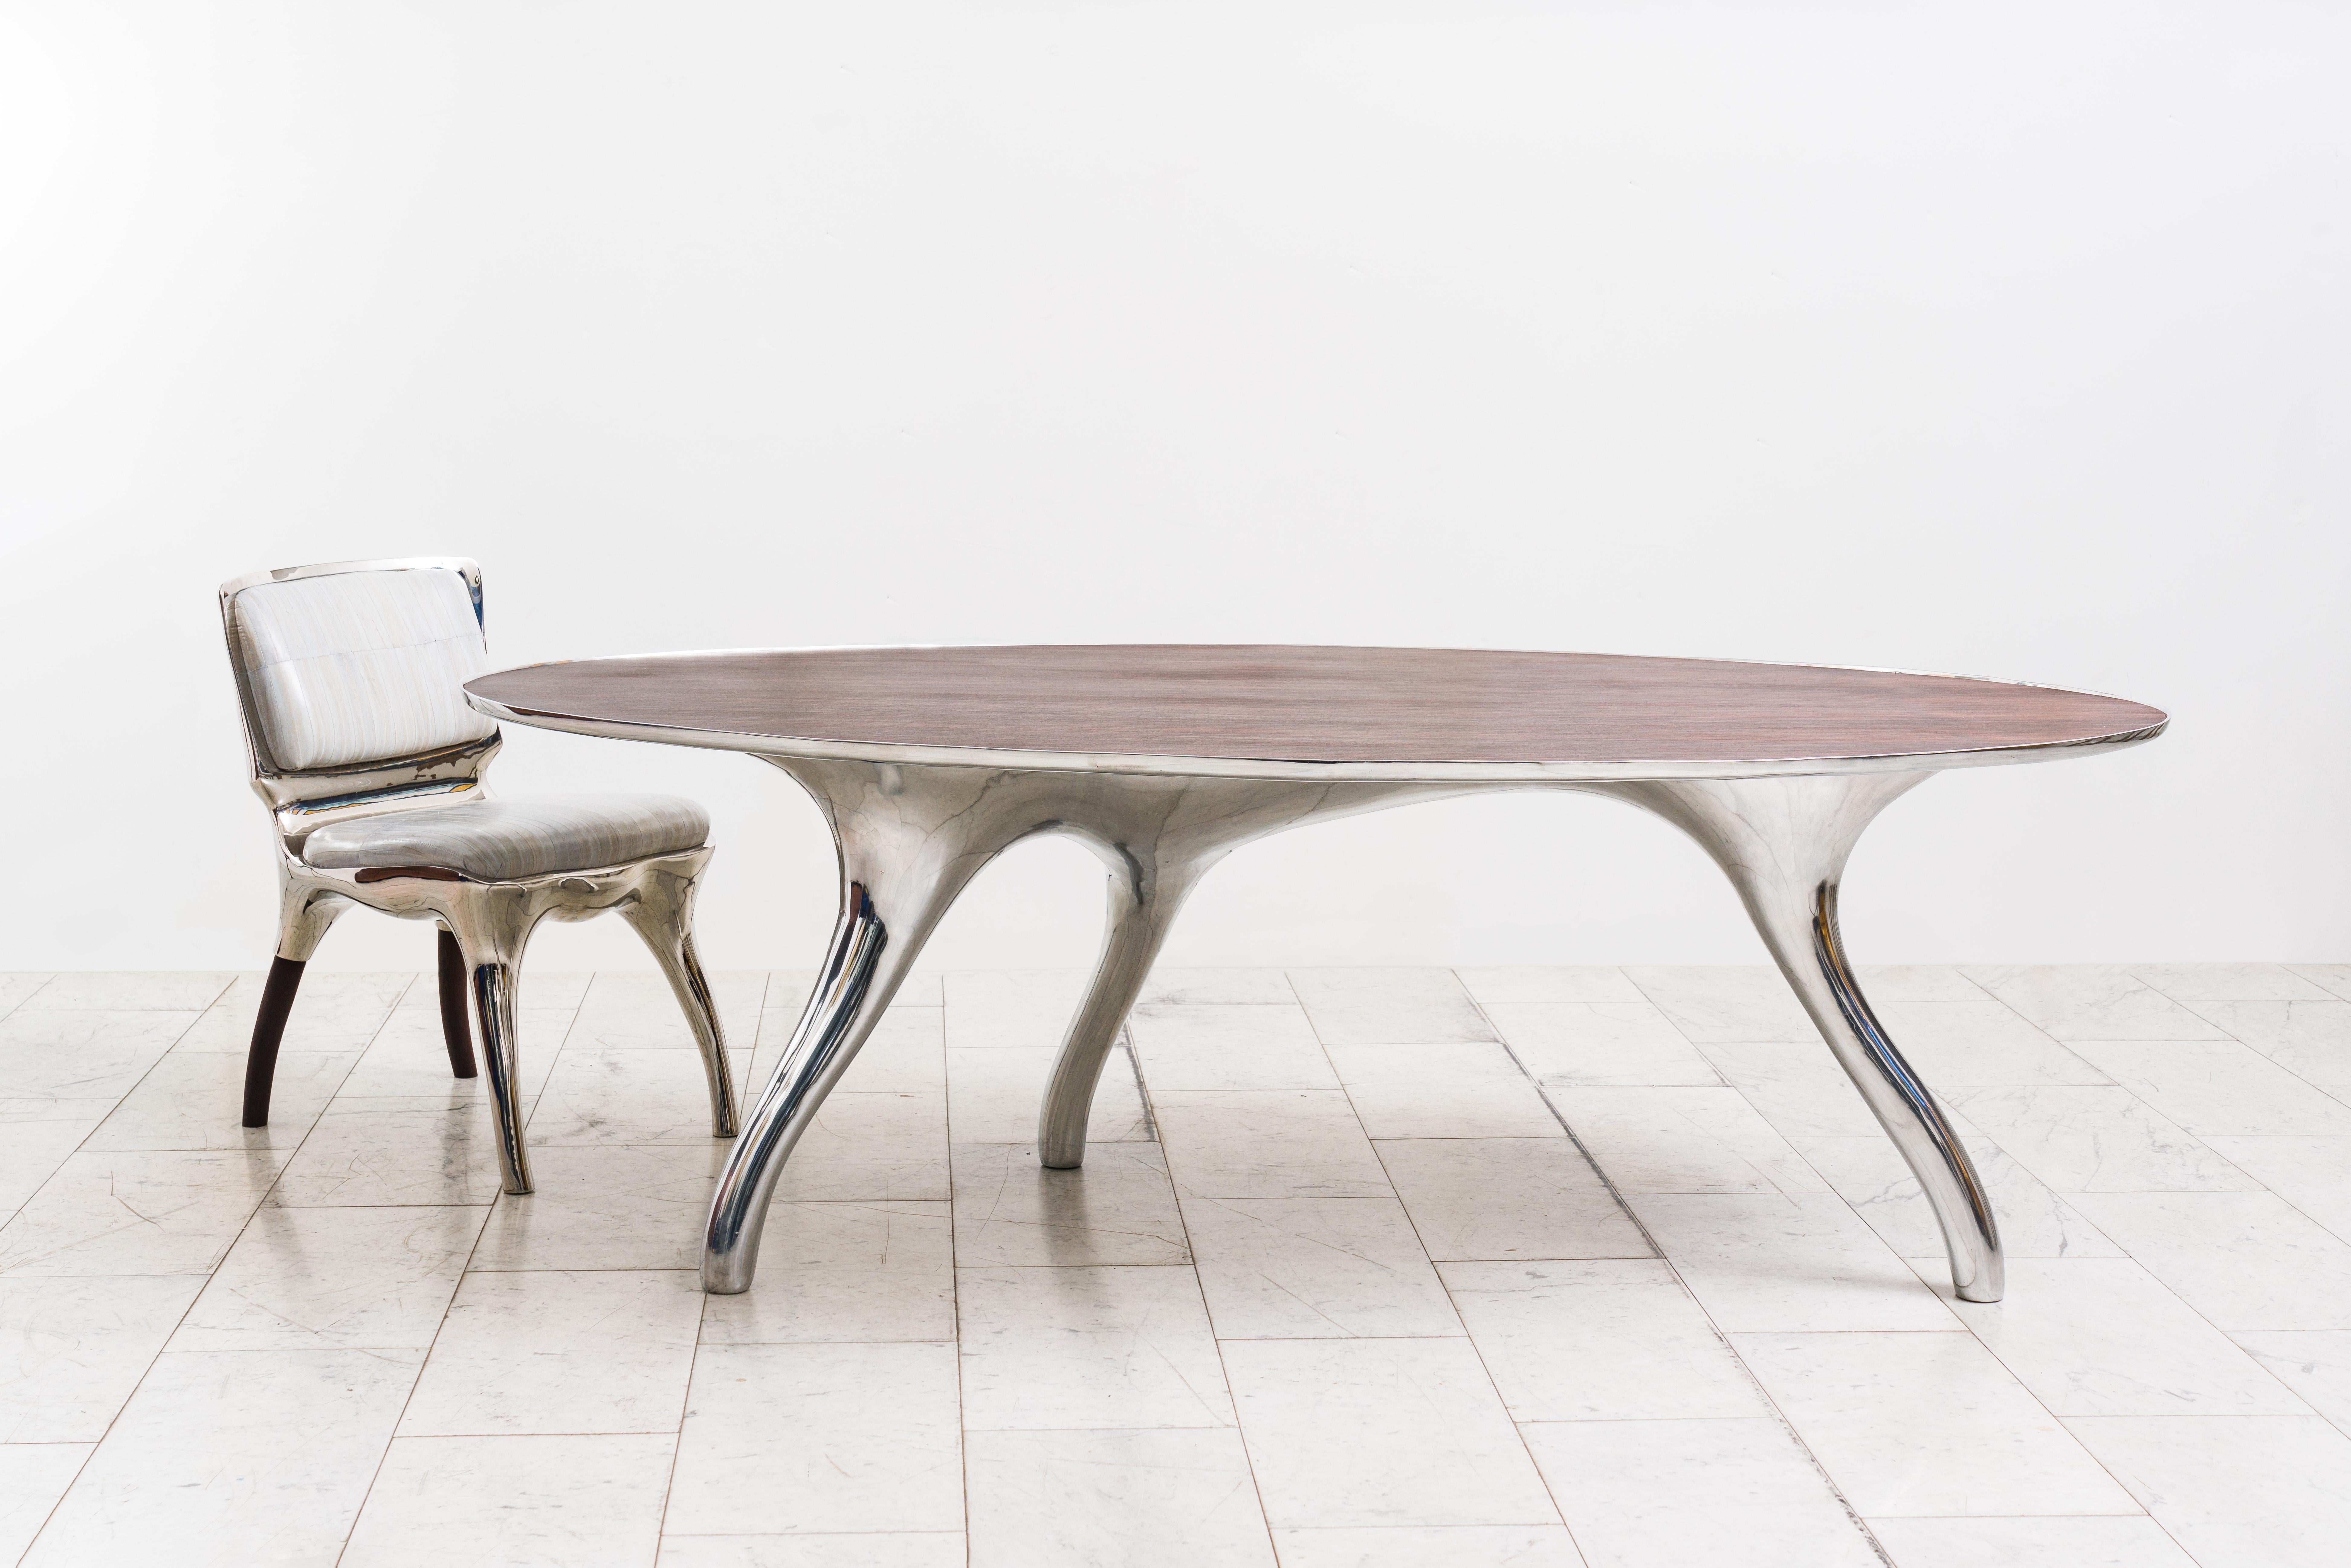 Alex Roskin’s Trois Jambes table with Bezel top can easily function as a desk or dining table. Resting on a sparkling tripod base of mirror-polished stainless steel, the table is an ideal option for unique spaces. Available by commission, the table